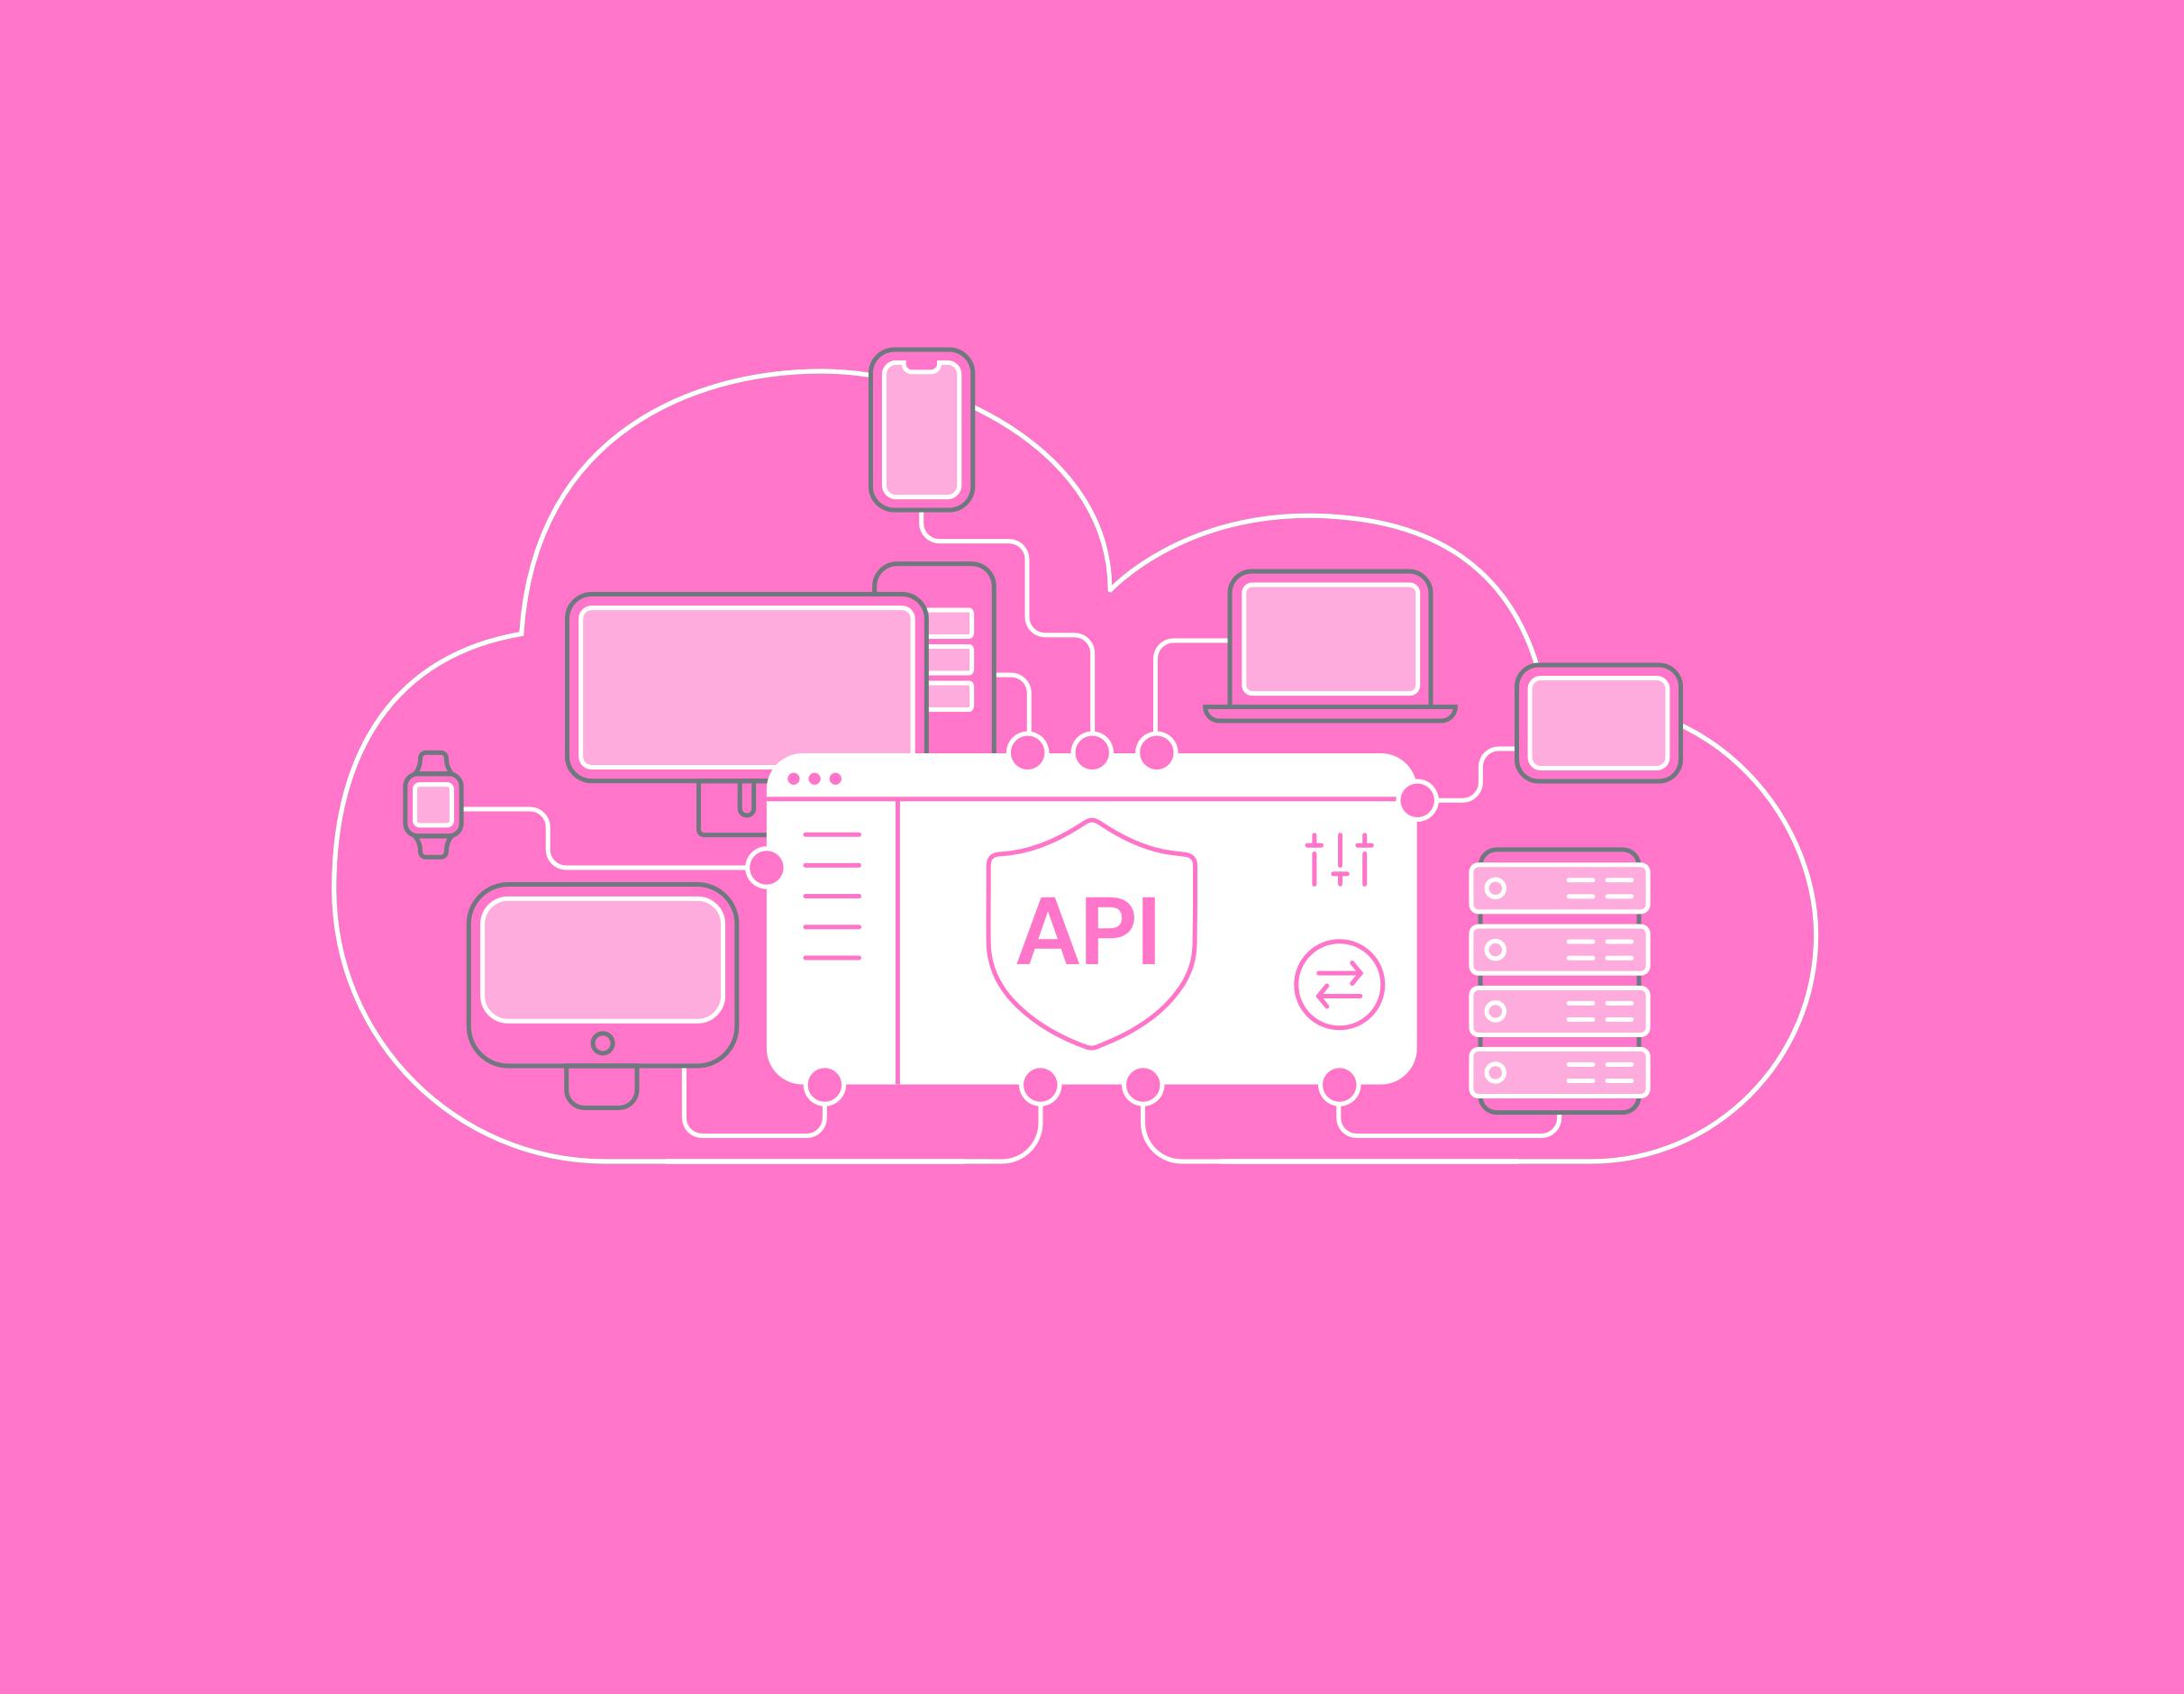 Software Licensing API to control the state of your application according to your license agreements